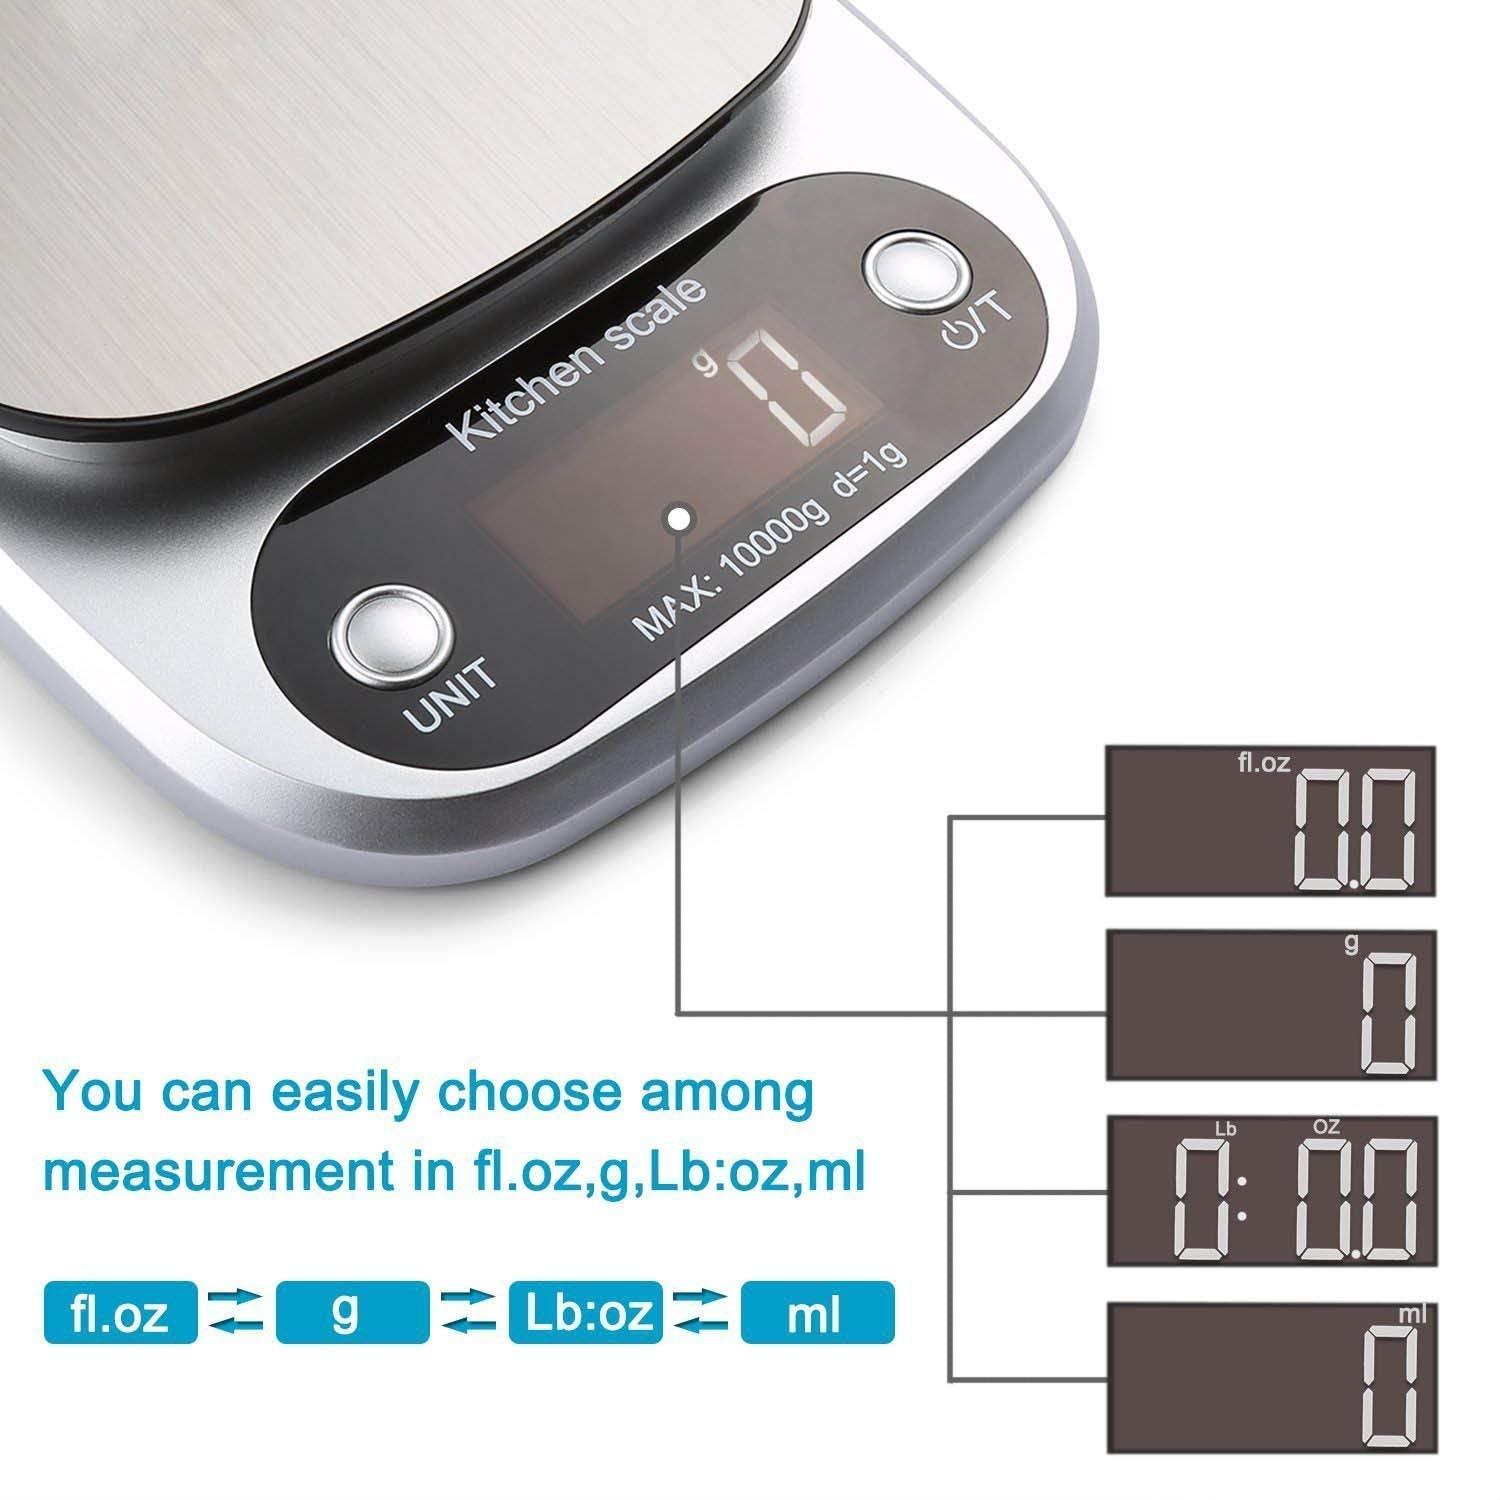 Food Scale 22lb Weight Grams, Digital Kitchen Scales and Ounces for Cooking, Baking - CookCave